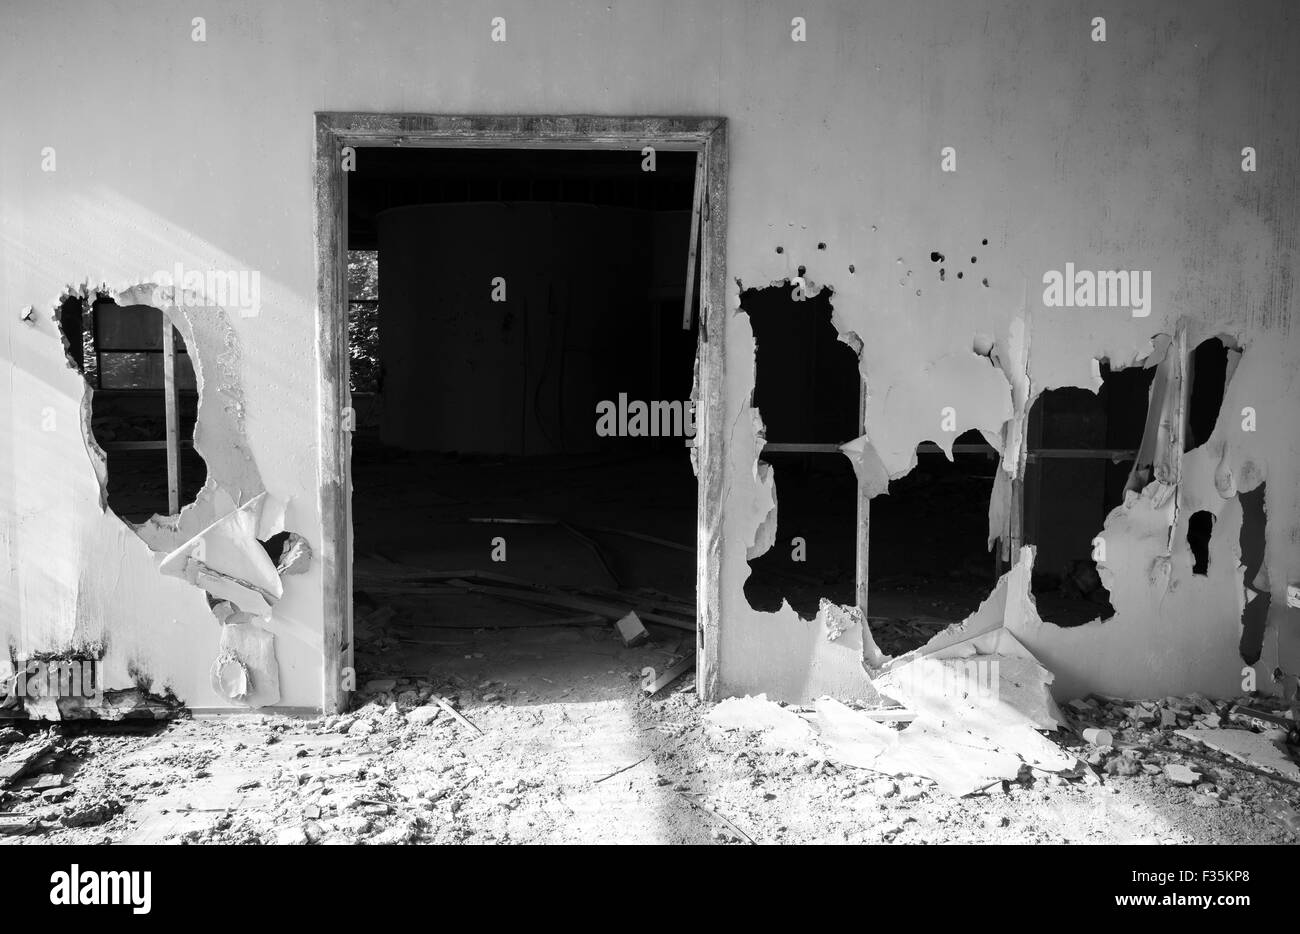 Abandoned building interior. Empty door and holes in wall. Black and white photo Stock Photo